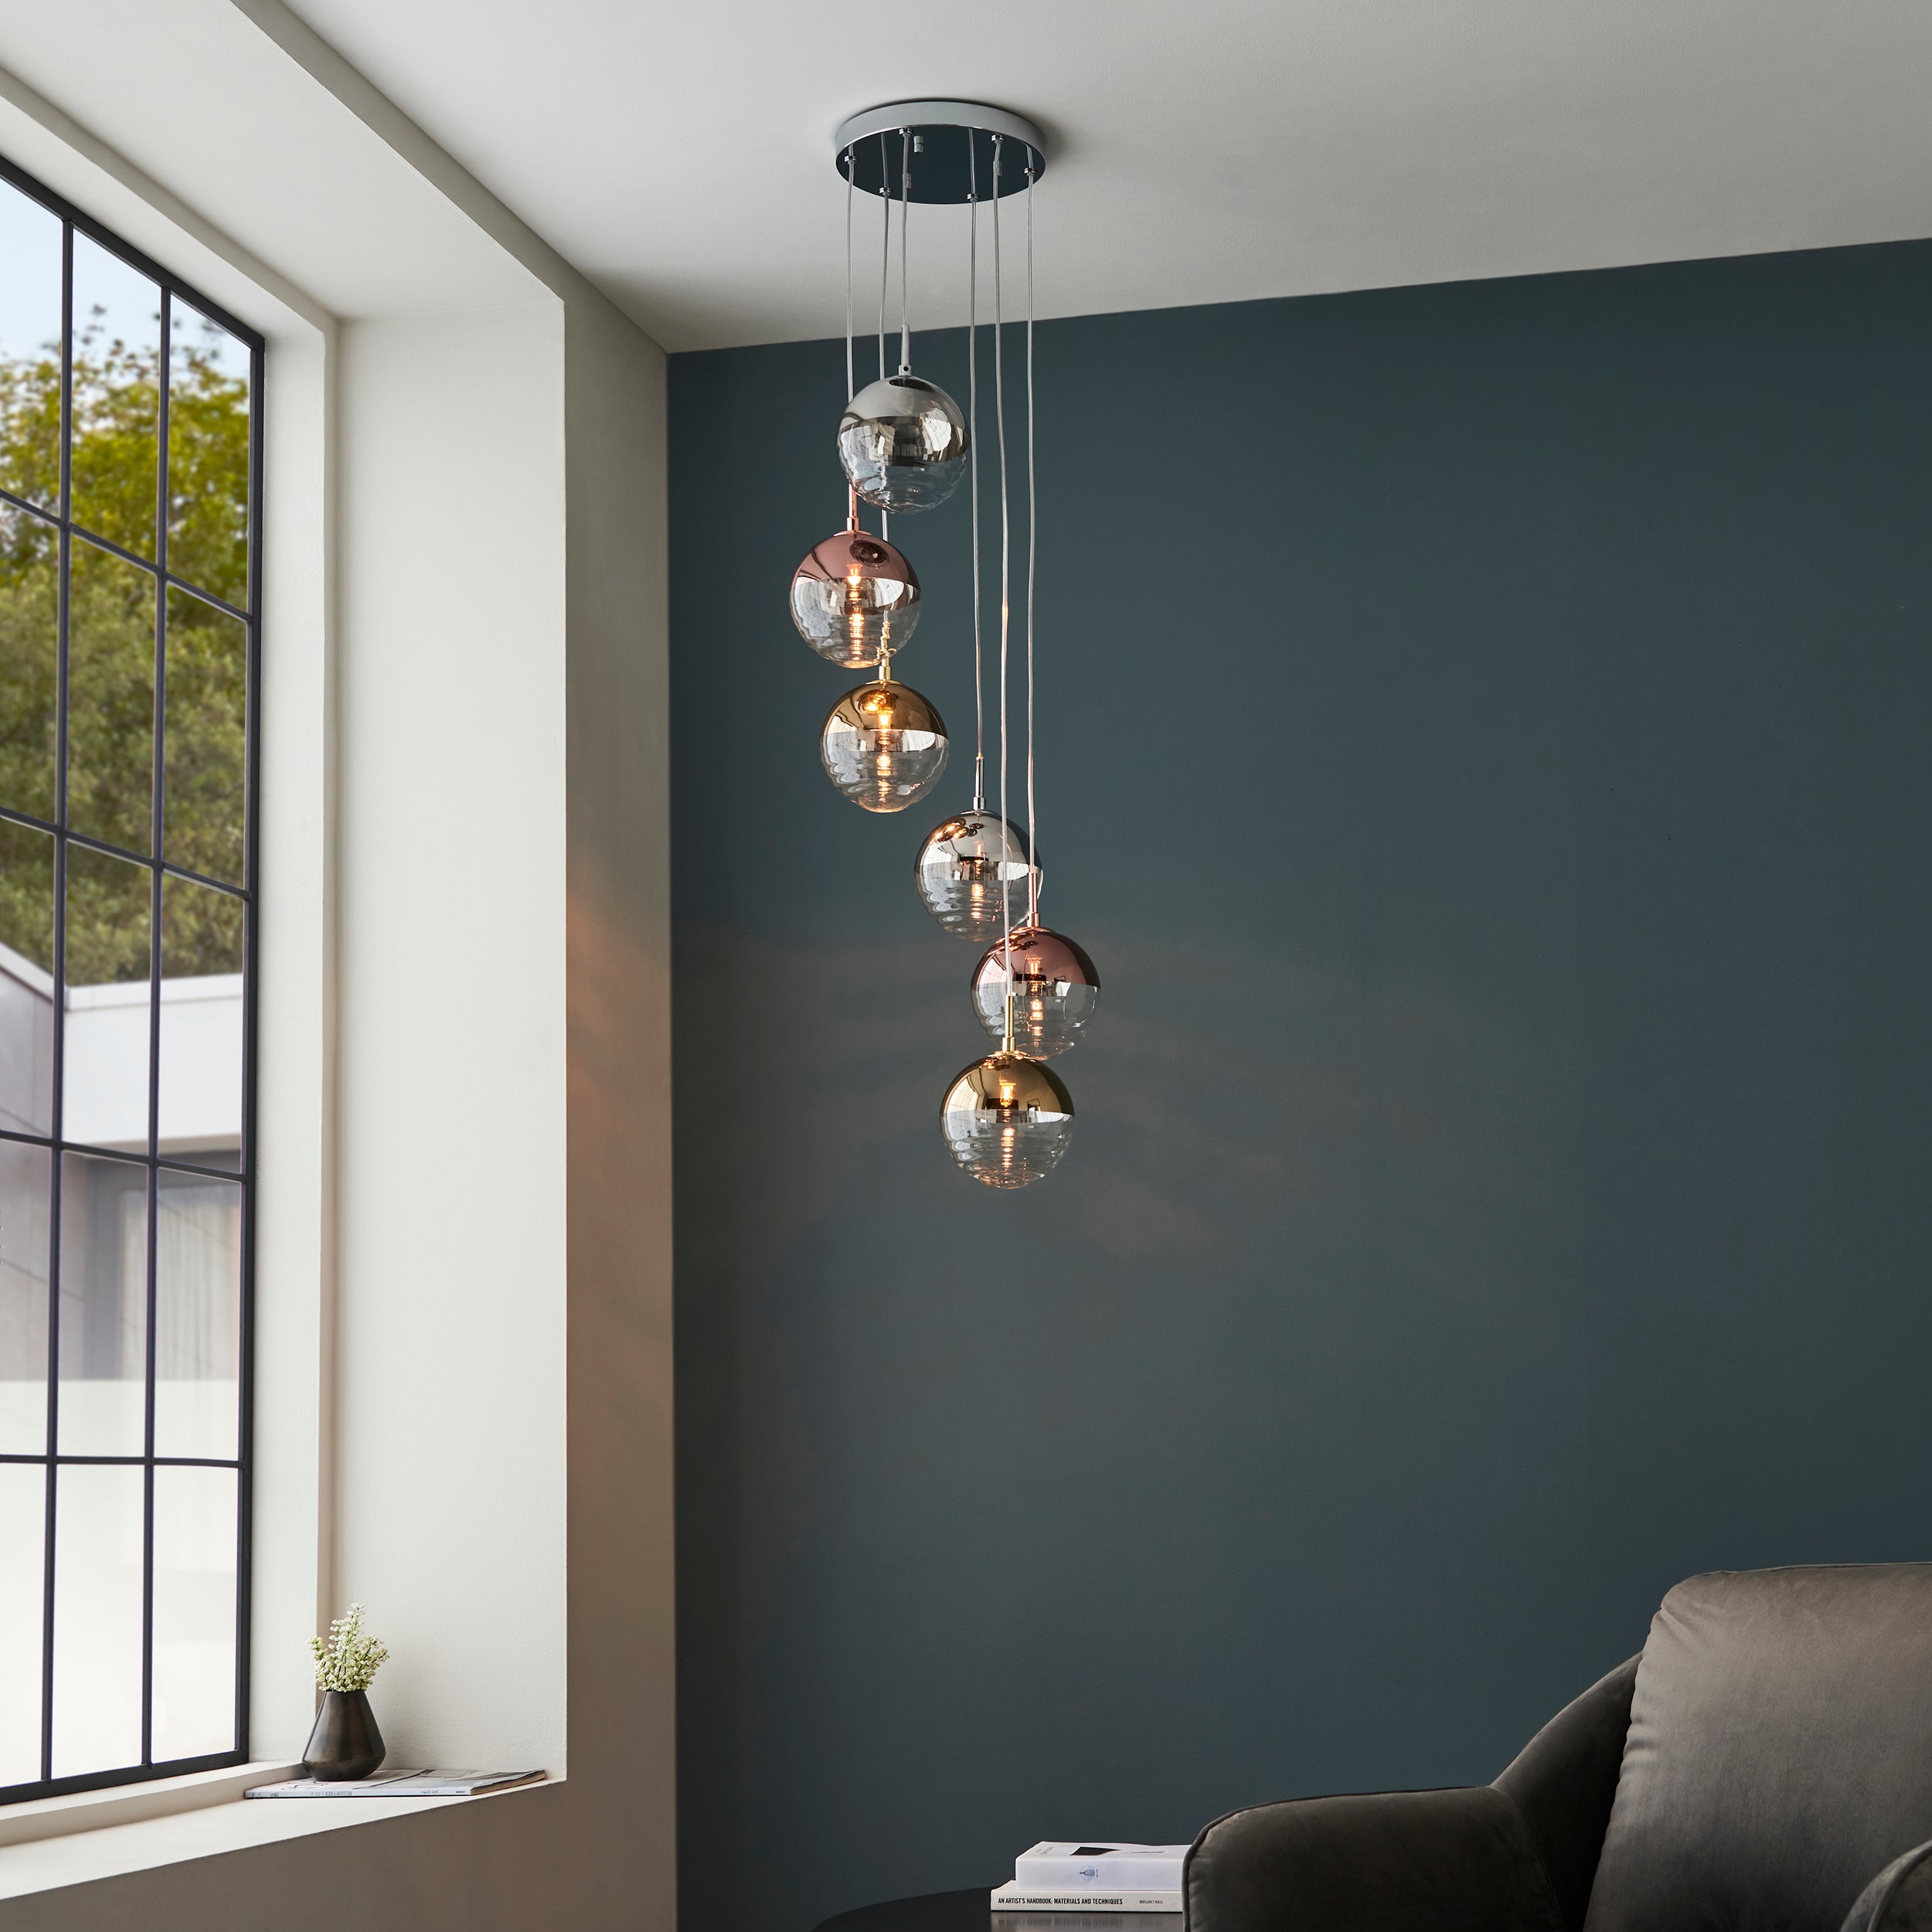 Paloma 6 Pendant. Chrome Plate With Chrome, Copper, Gold & Clear Glass